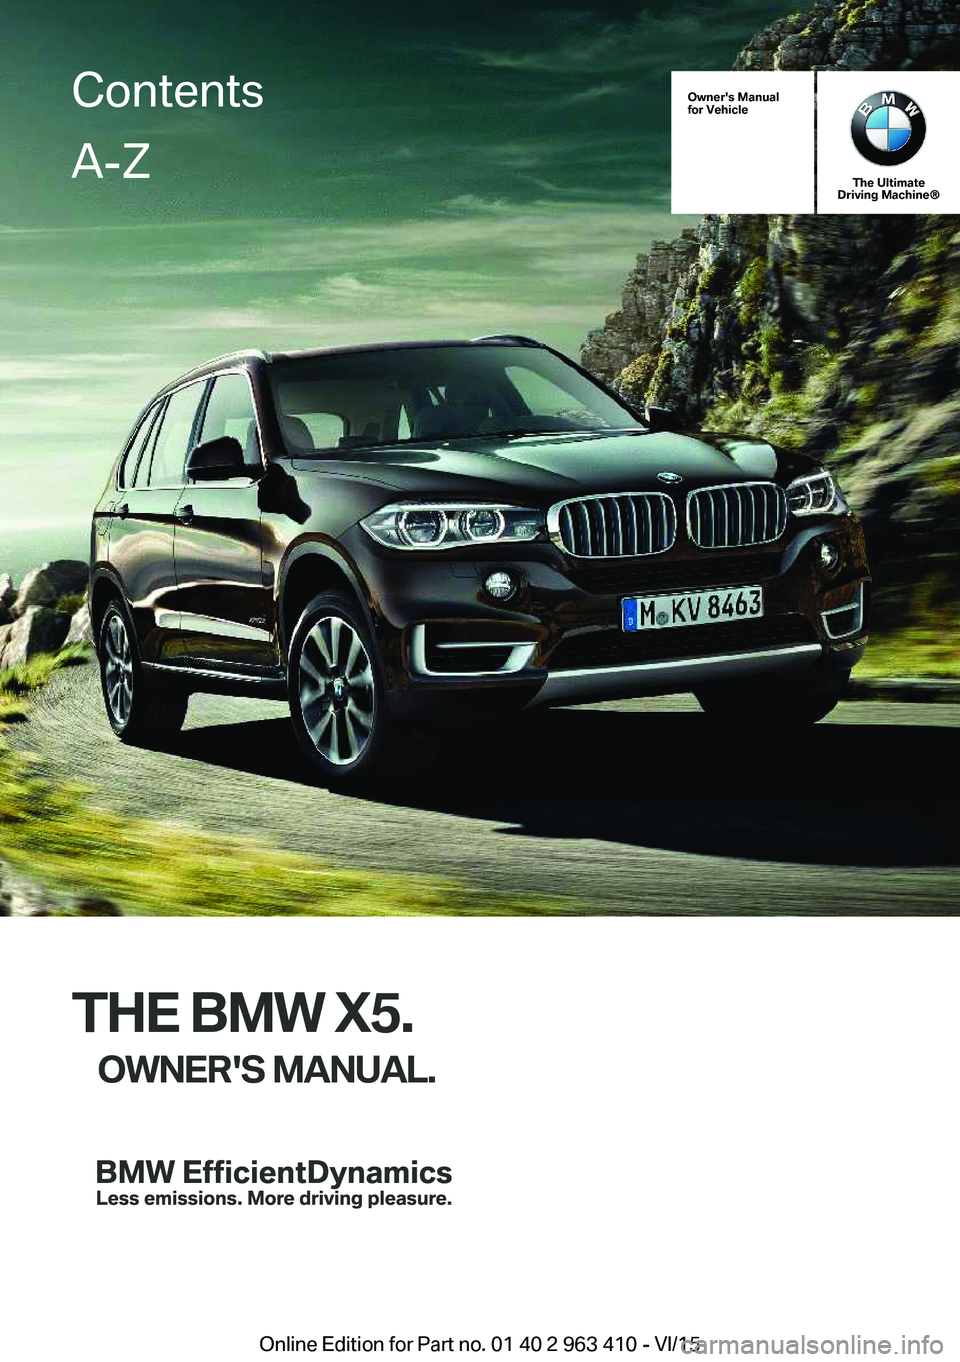 BMW X5 XDRIVE50I 2016  Owners Manual Owner's Manual
for Vehicle
The Ultimate
Driving Machine®
THE BMW X5.
OWNER'S MANUAL.
ContentsA-Z
Online Edition for Part no. 01 40 2 963 410 - VI/15   